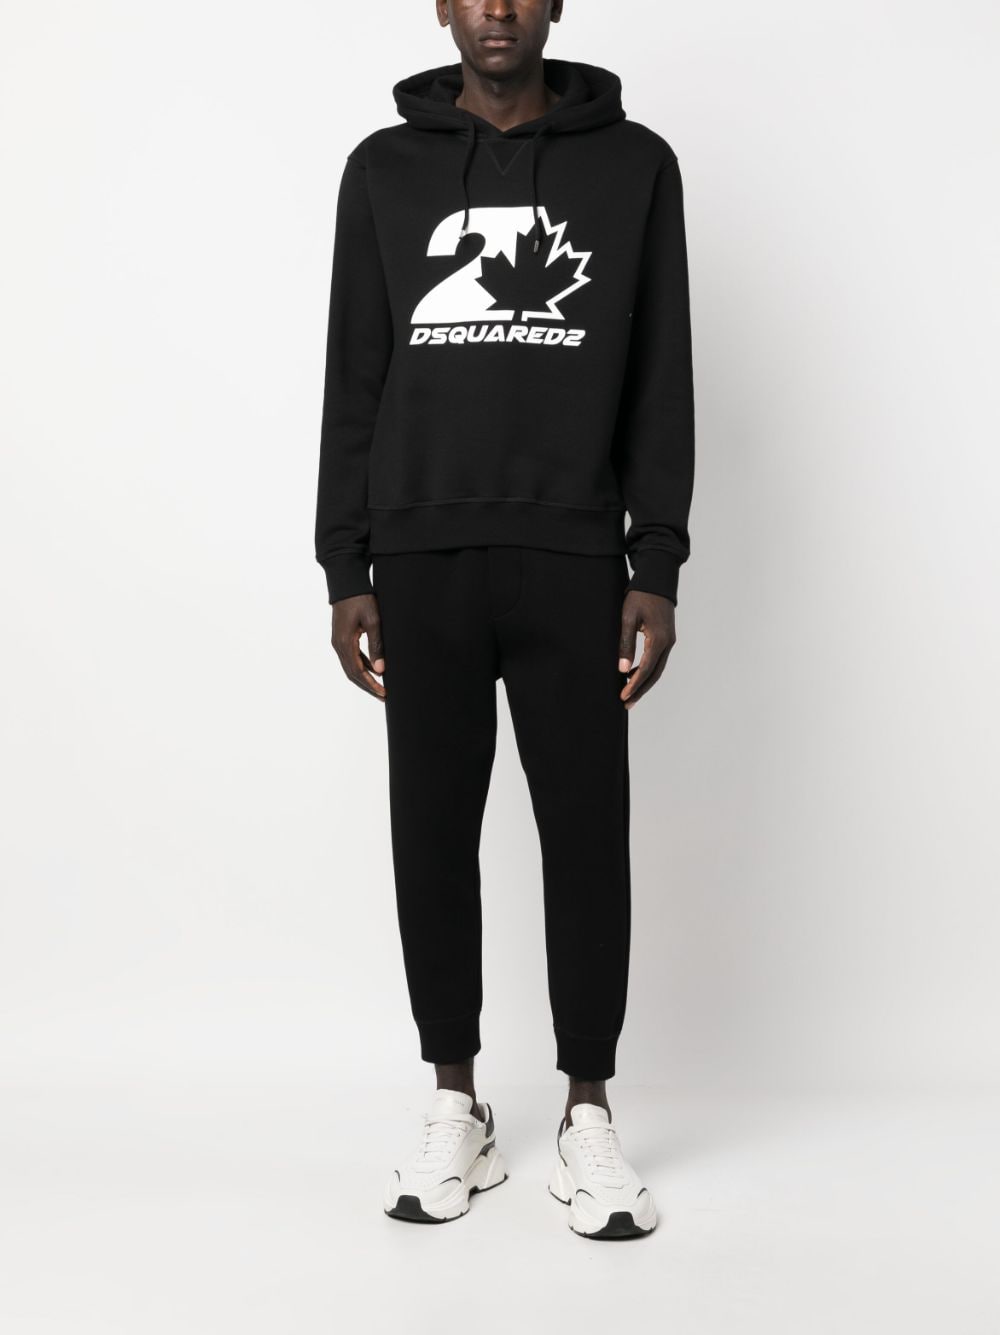 DSQUARED2 Stylish and Comfortable Black Drawstring Cotton Hoodie for Men - FW23 Collection